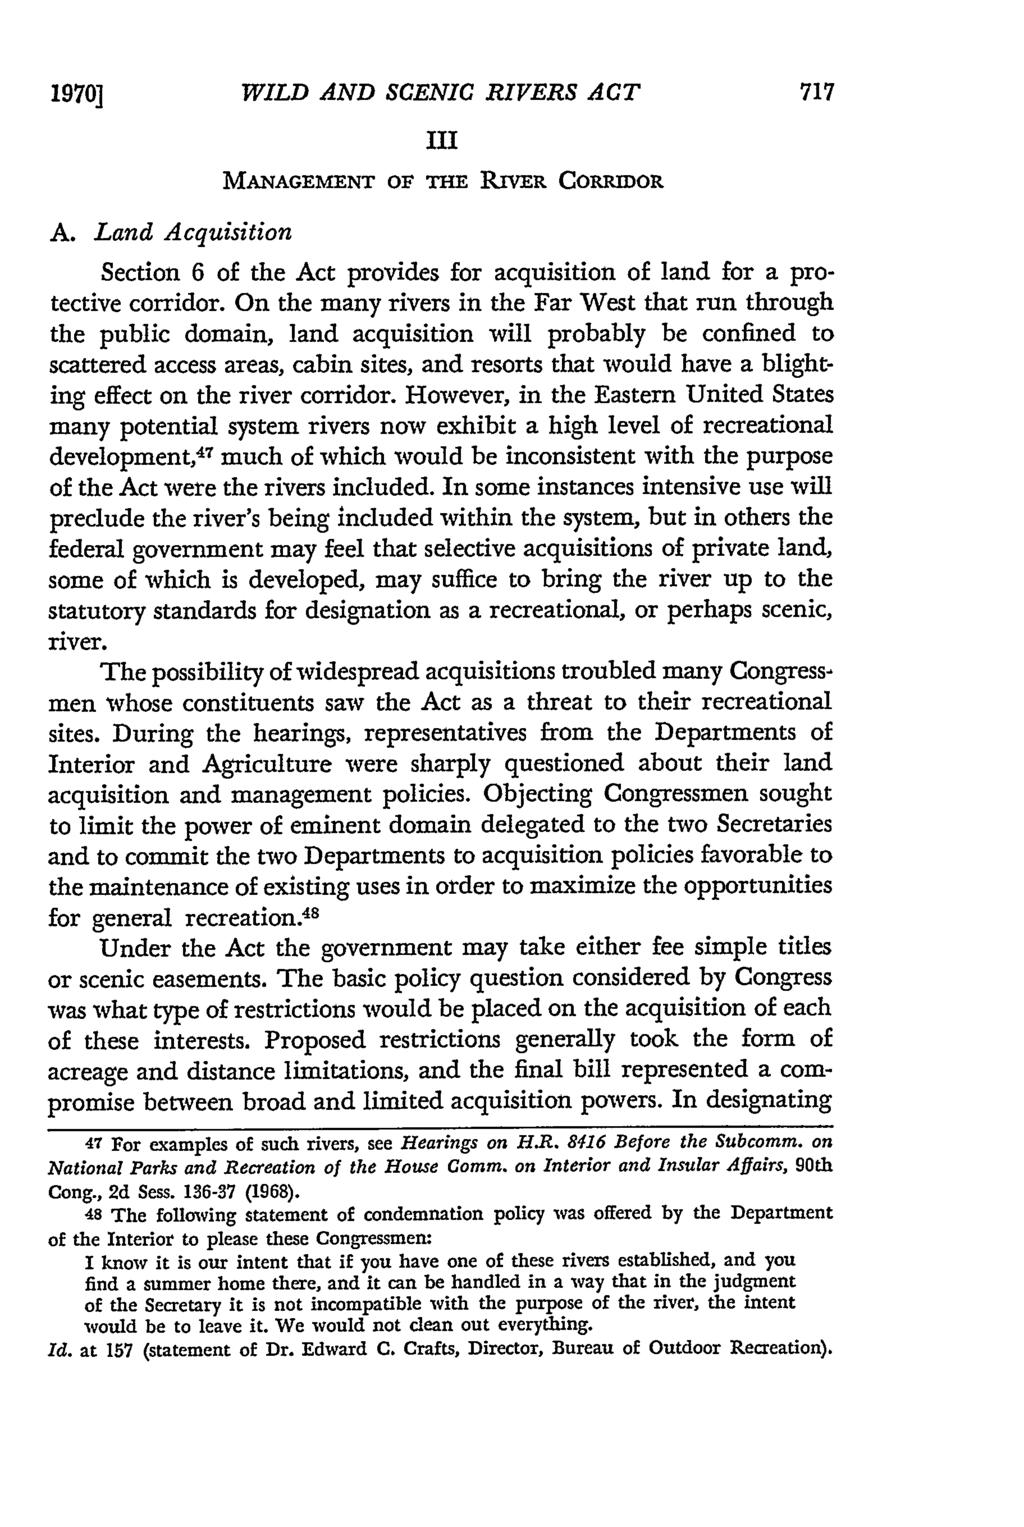 1970] WILD AND SCENIC RIVERS ACT III MANAGEMENT of TmH RrvER CORRIDOR A. Land Acquisition Section 6 of the Act provides for acquisition of land for a protective corridor.